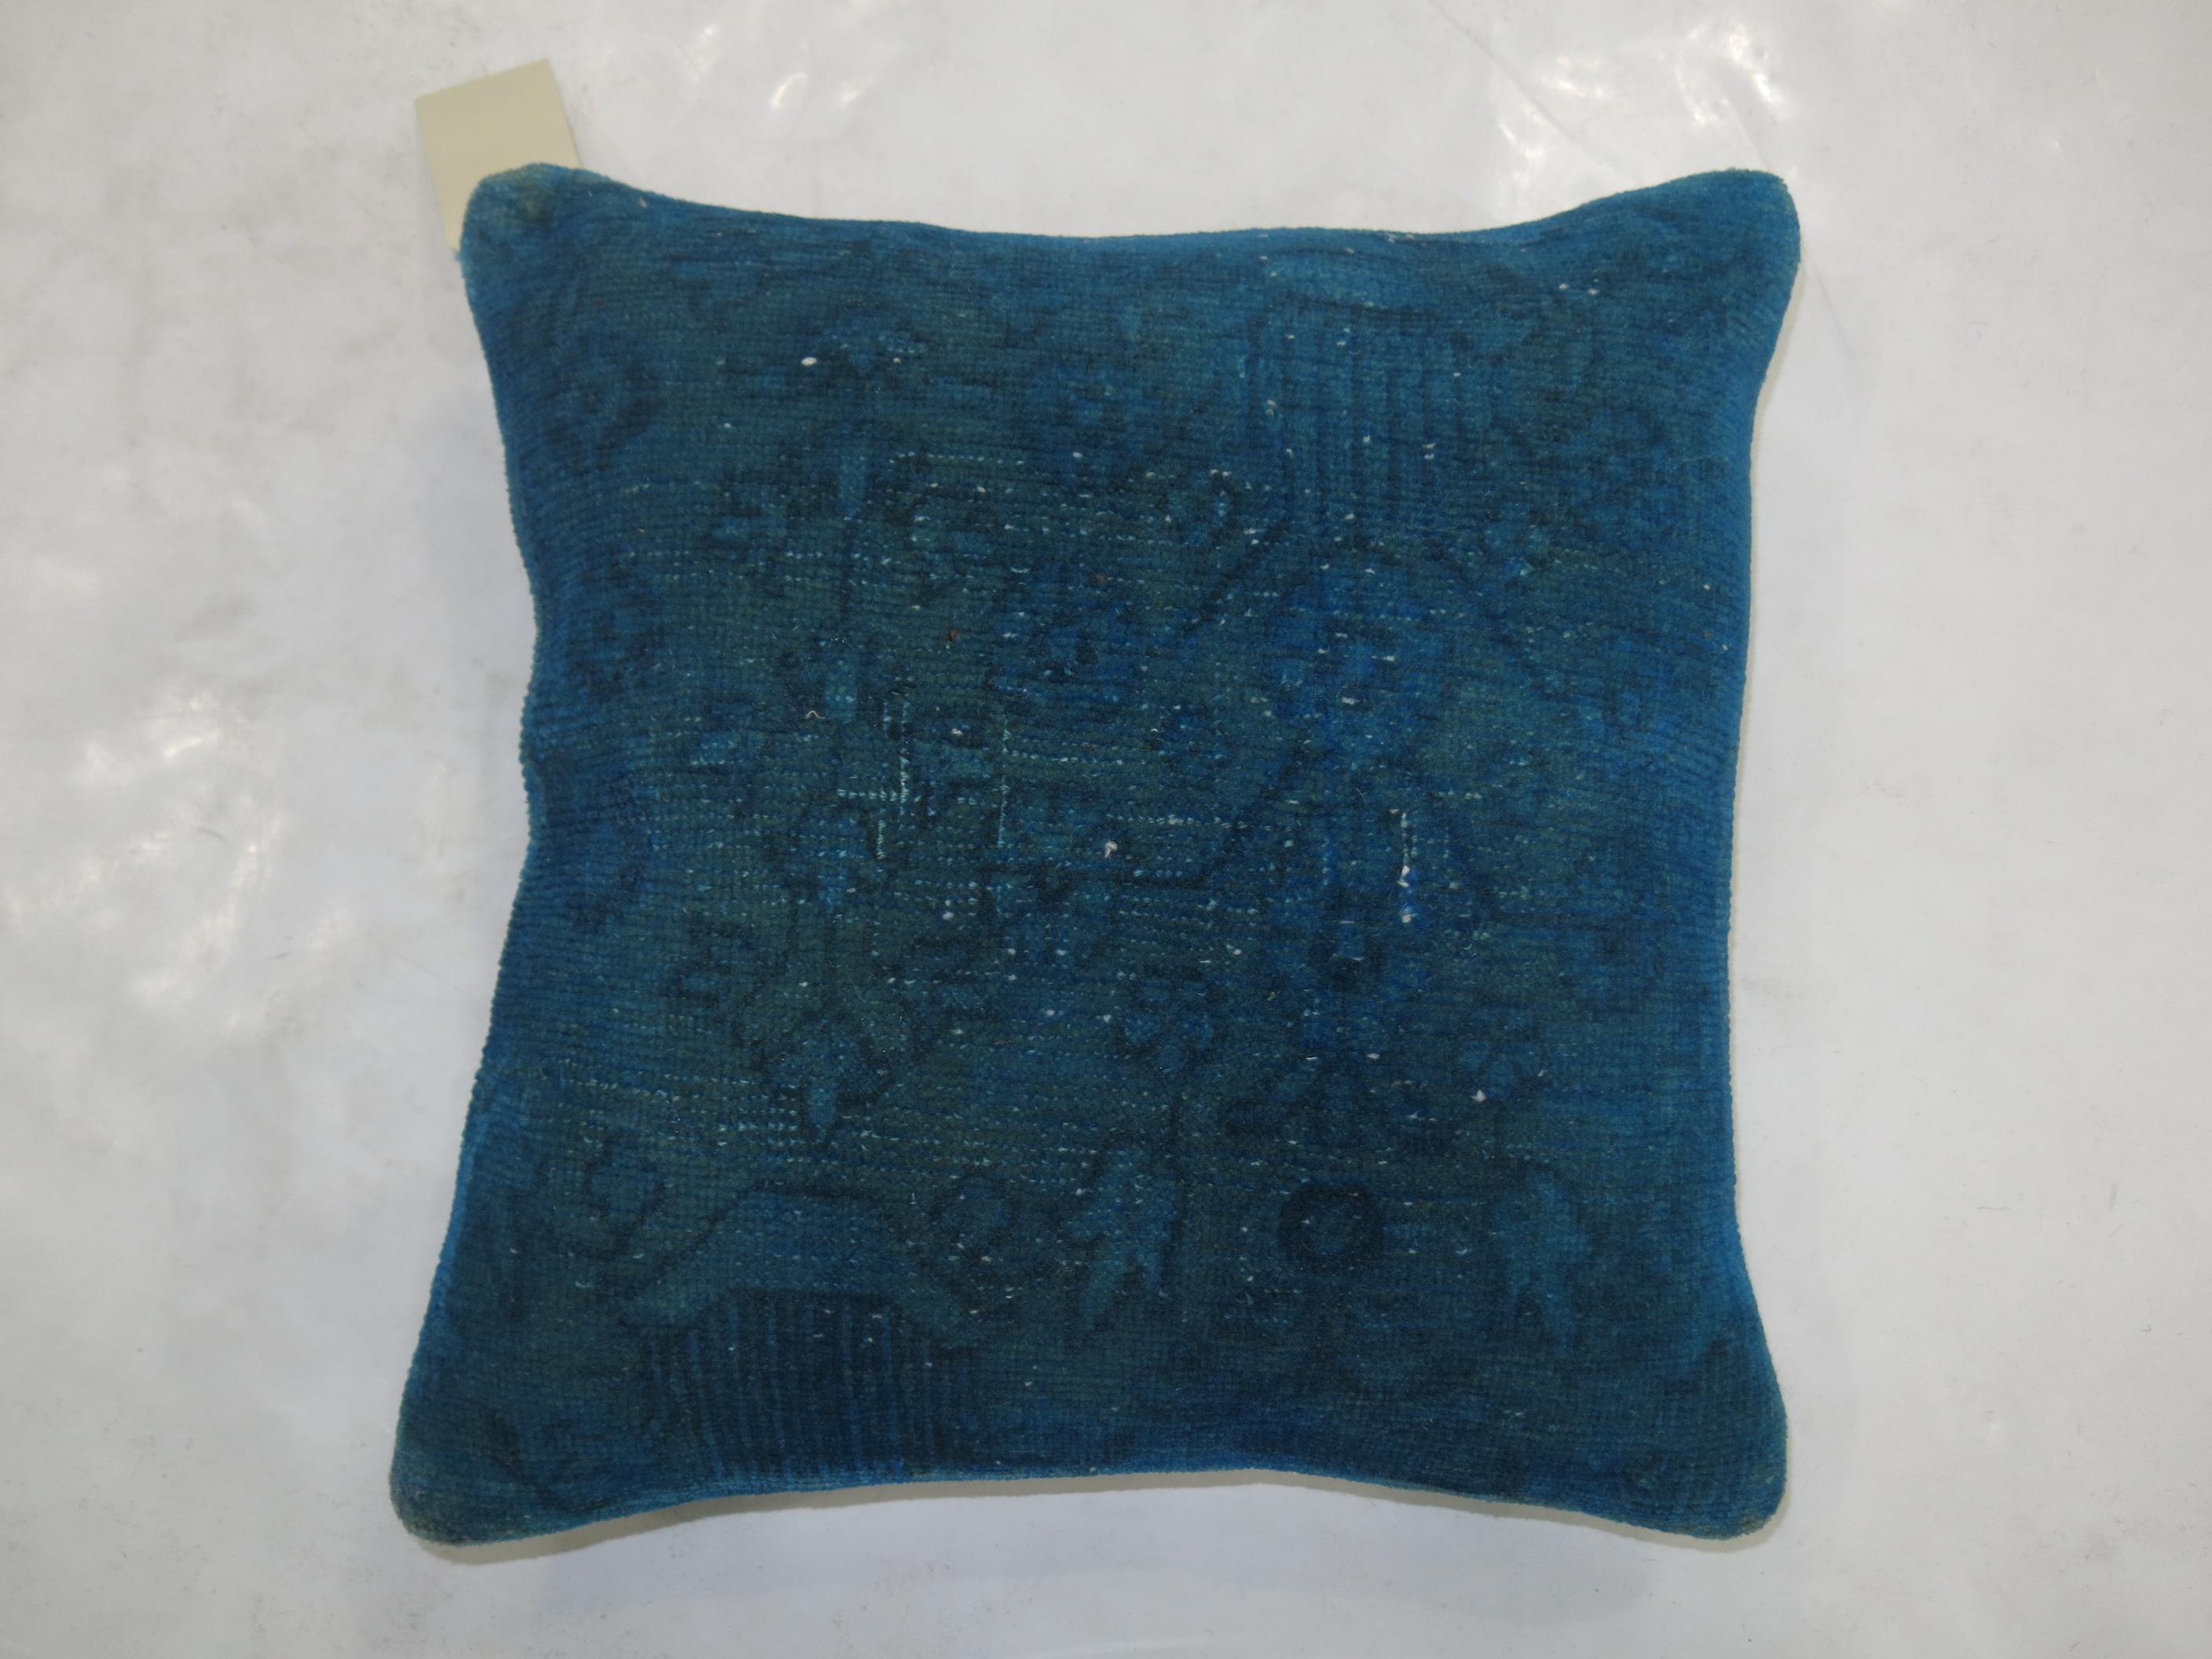 Pillow made from a 20th century Turkish rug with blue cotton back and zipper closure. Its been over-dyed

Measures: 16